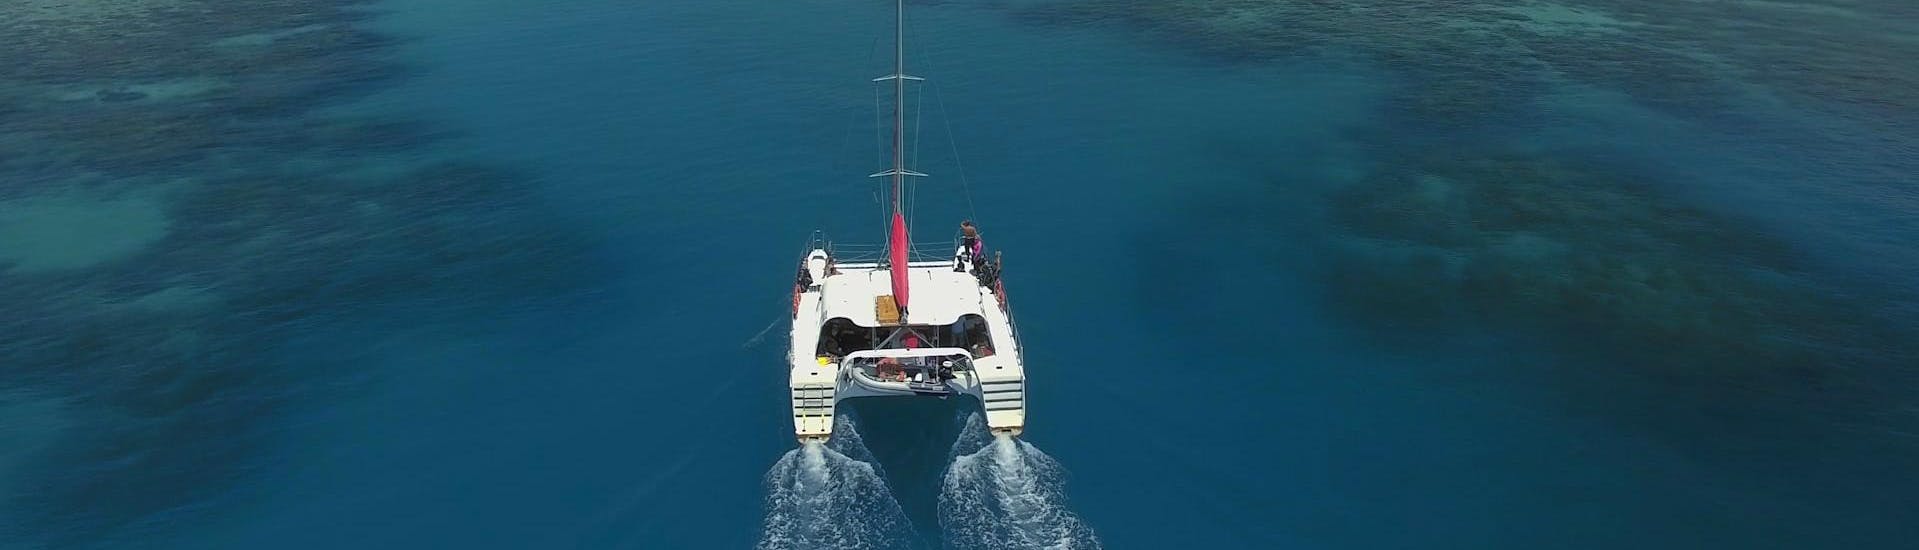 The catamaran Reef Daytripper Cairns is heading towards Upolu Reef during the Great Barrier Reef Diving Trip for Certified Divers.